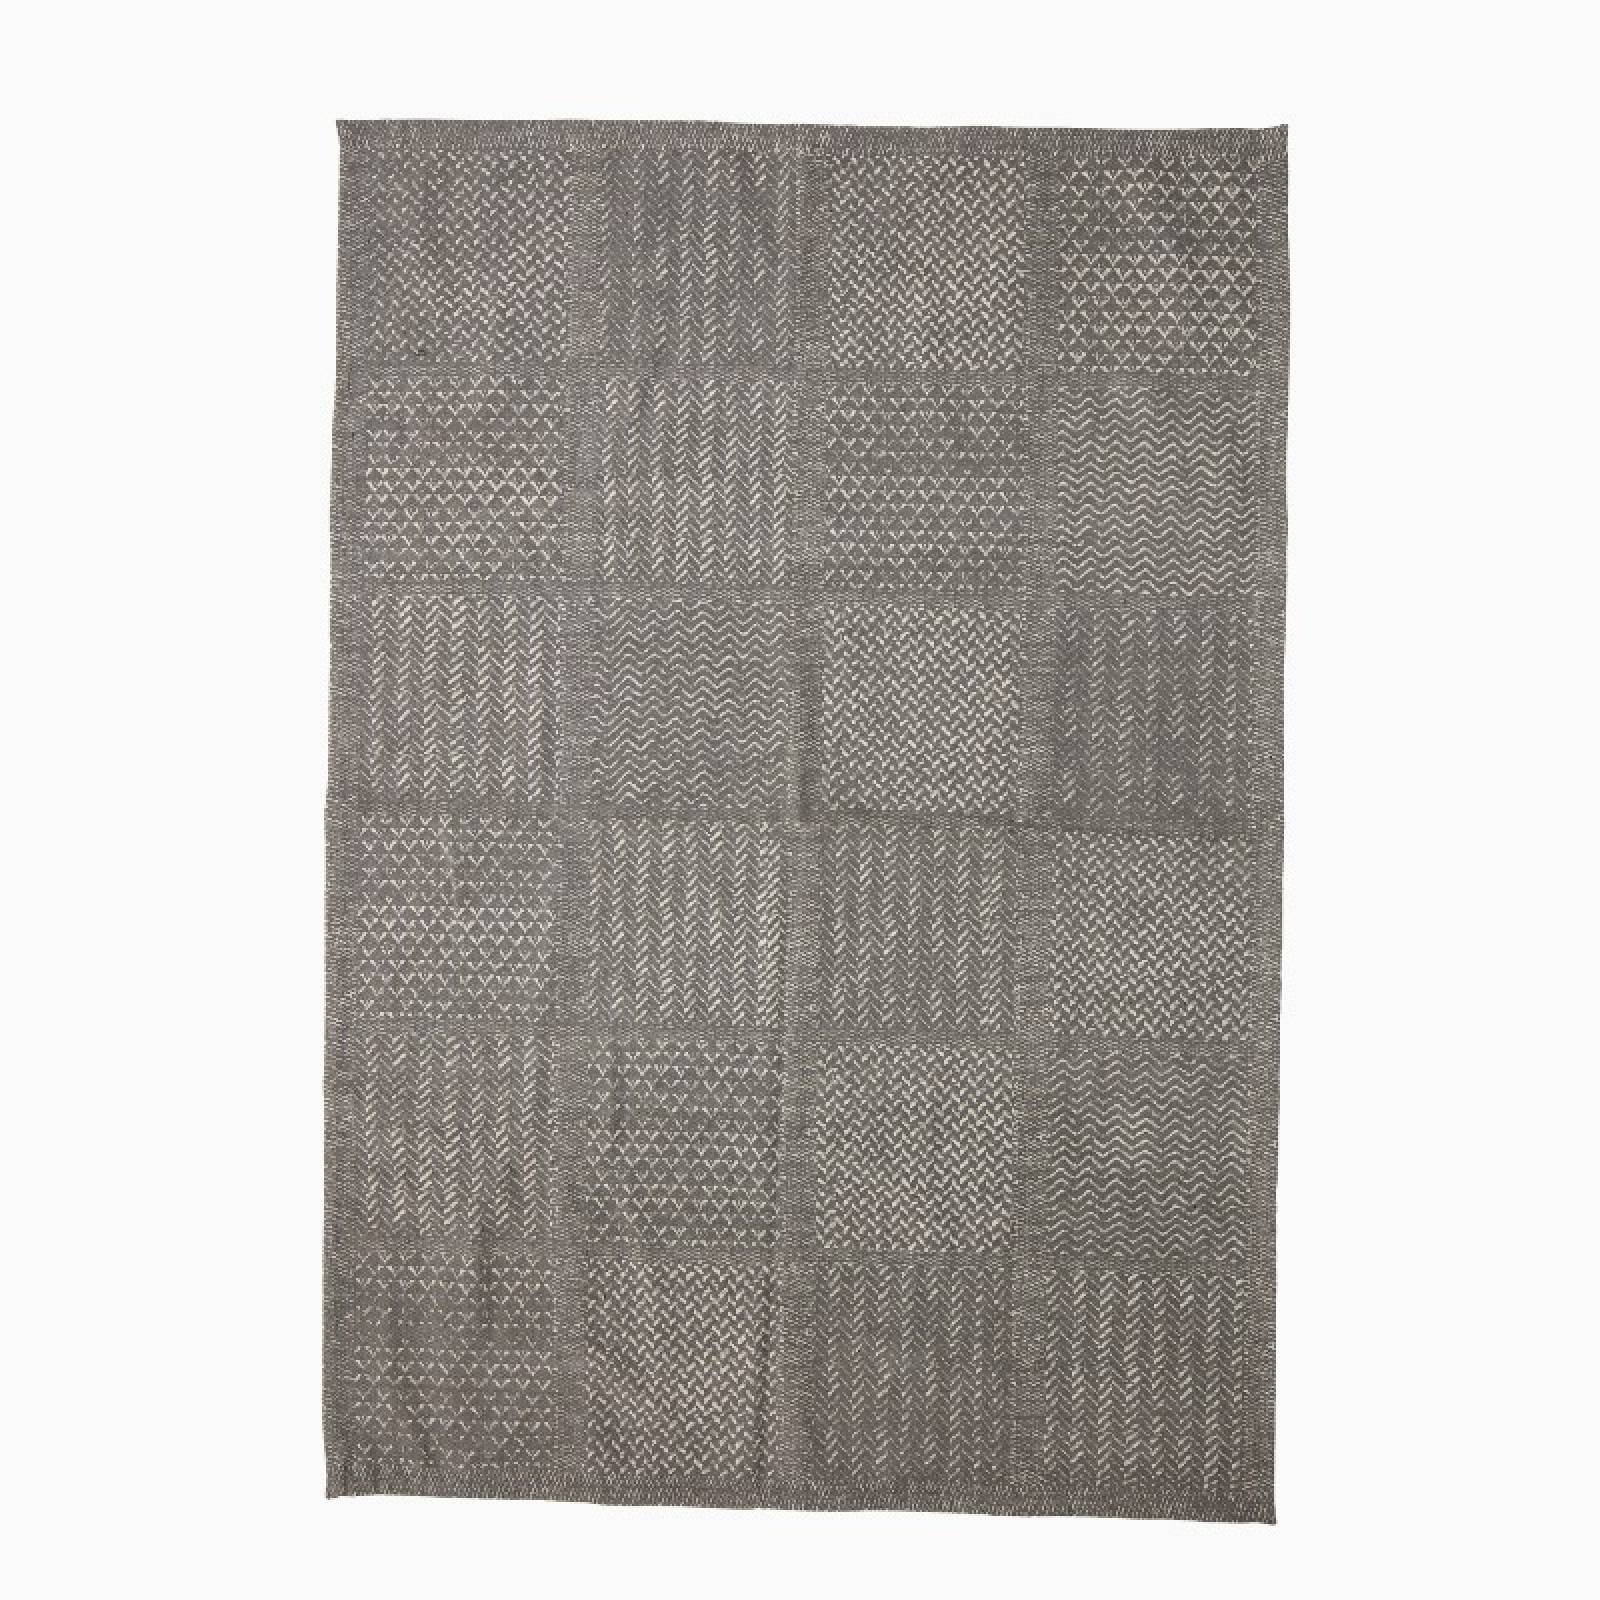 Multi-Textured Woven Cotton Rug In Grey thumbnails